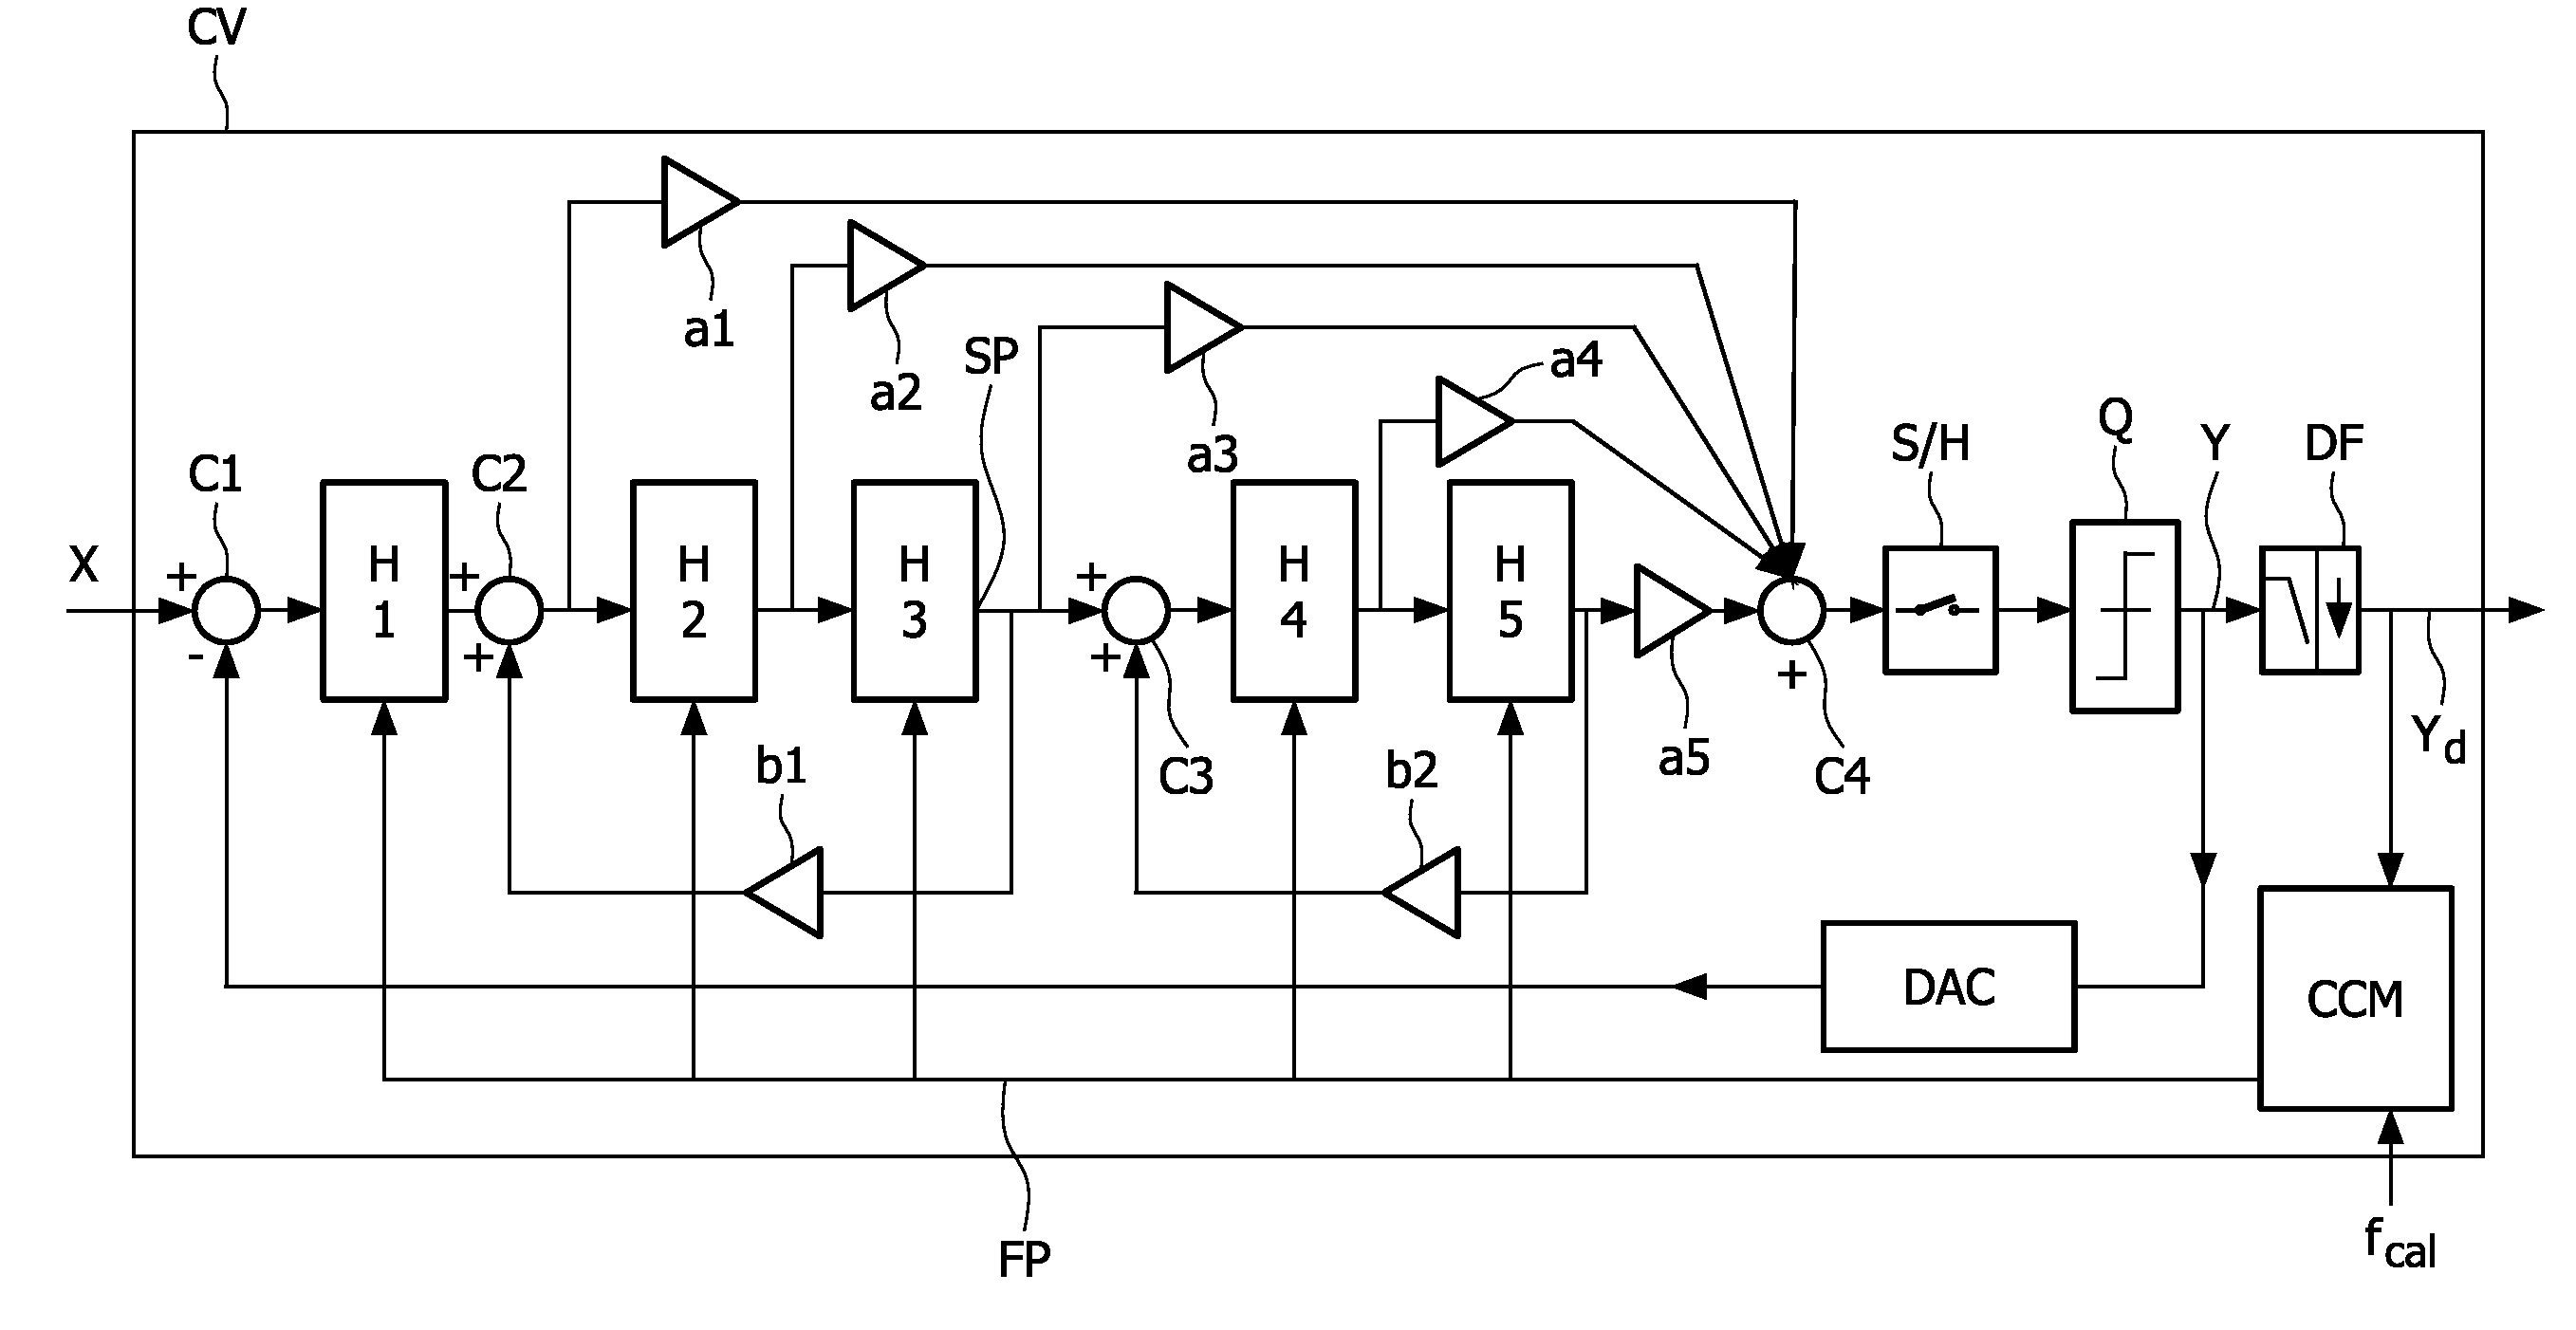 Continuous-time sigma-delta analog-to-digital converter with capacitor and/or resistance digital self-calibration means for rc spread compensation